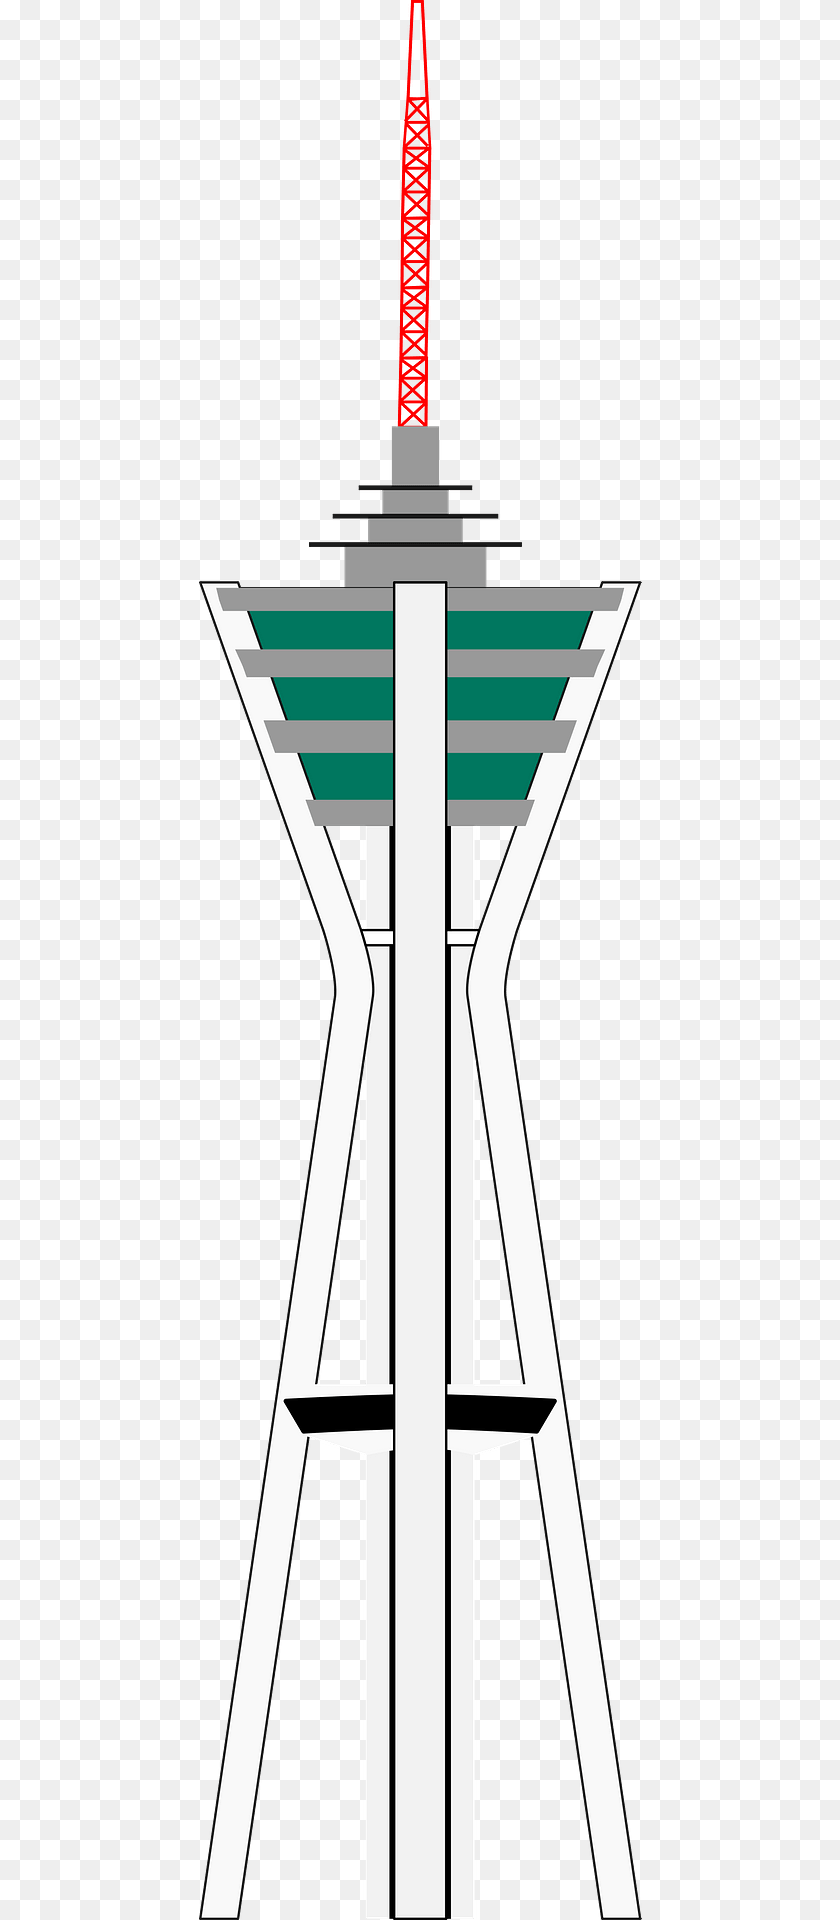 443x1920 Tower In Alor Setar Clipart, Utility Pole PNG